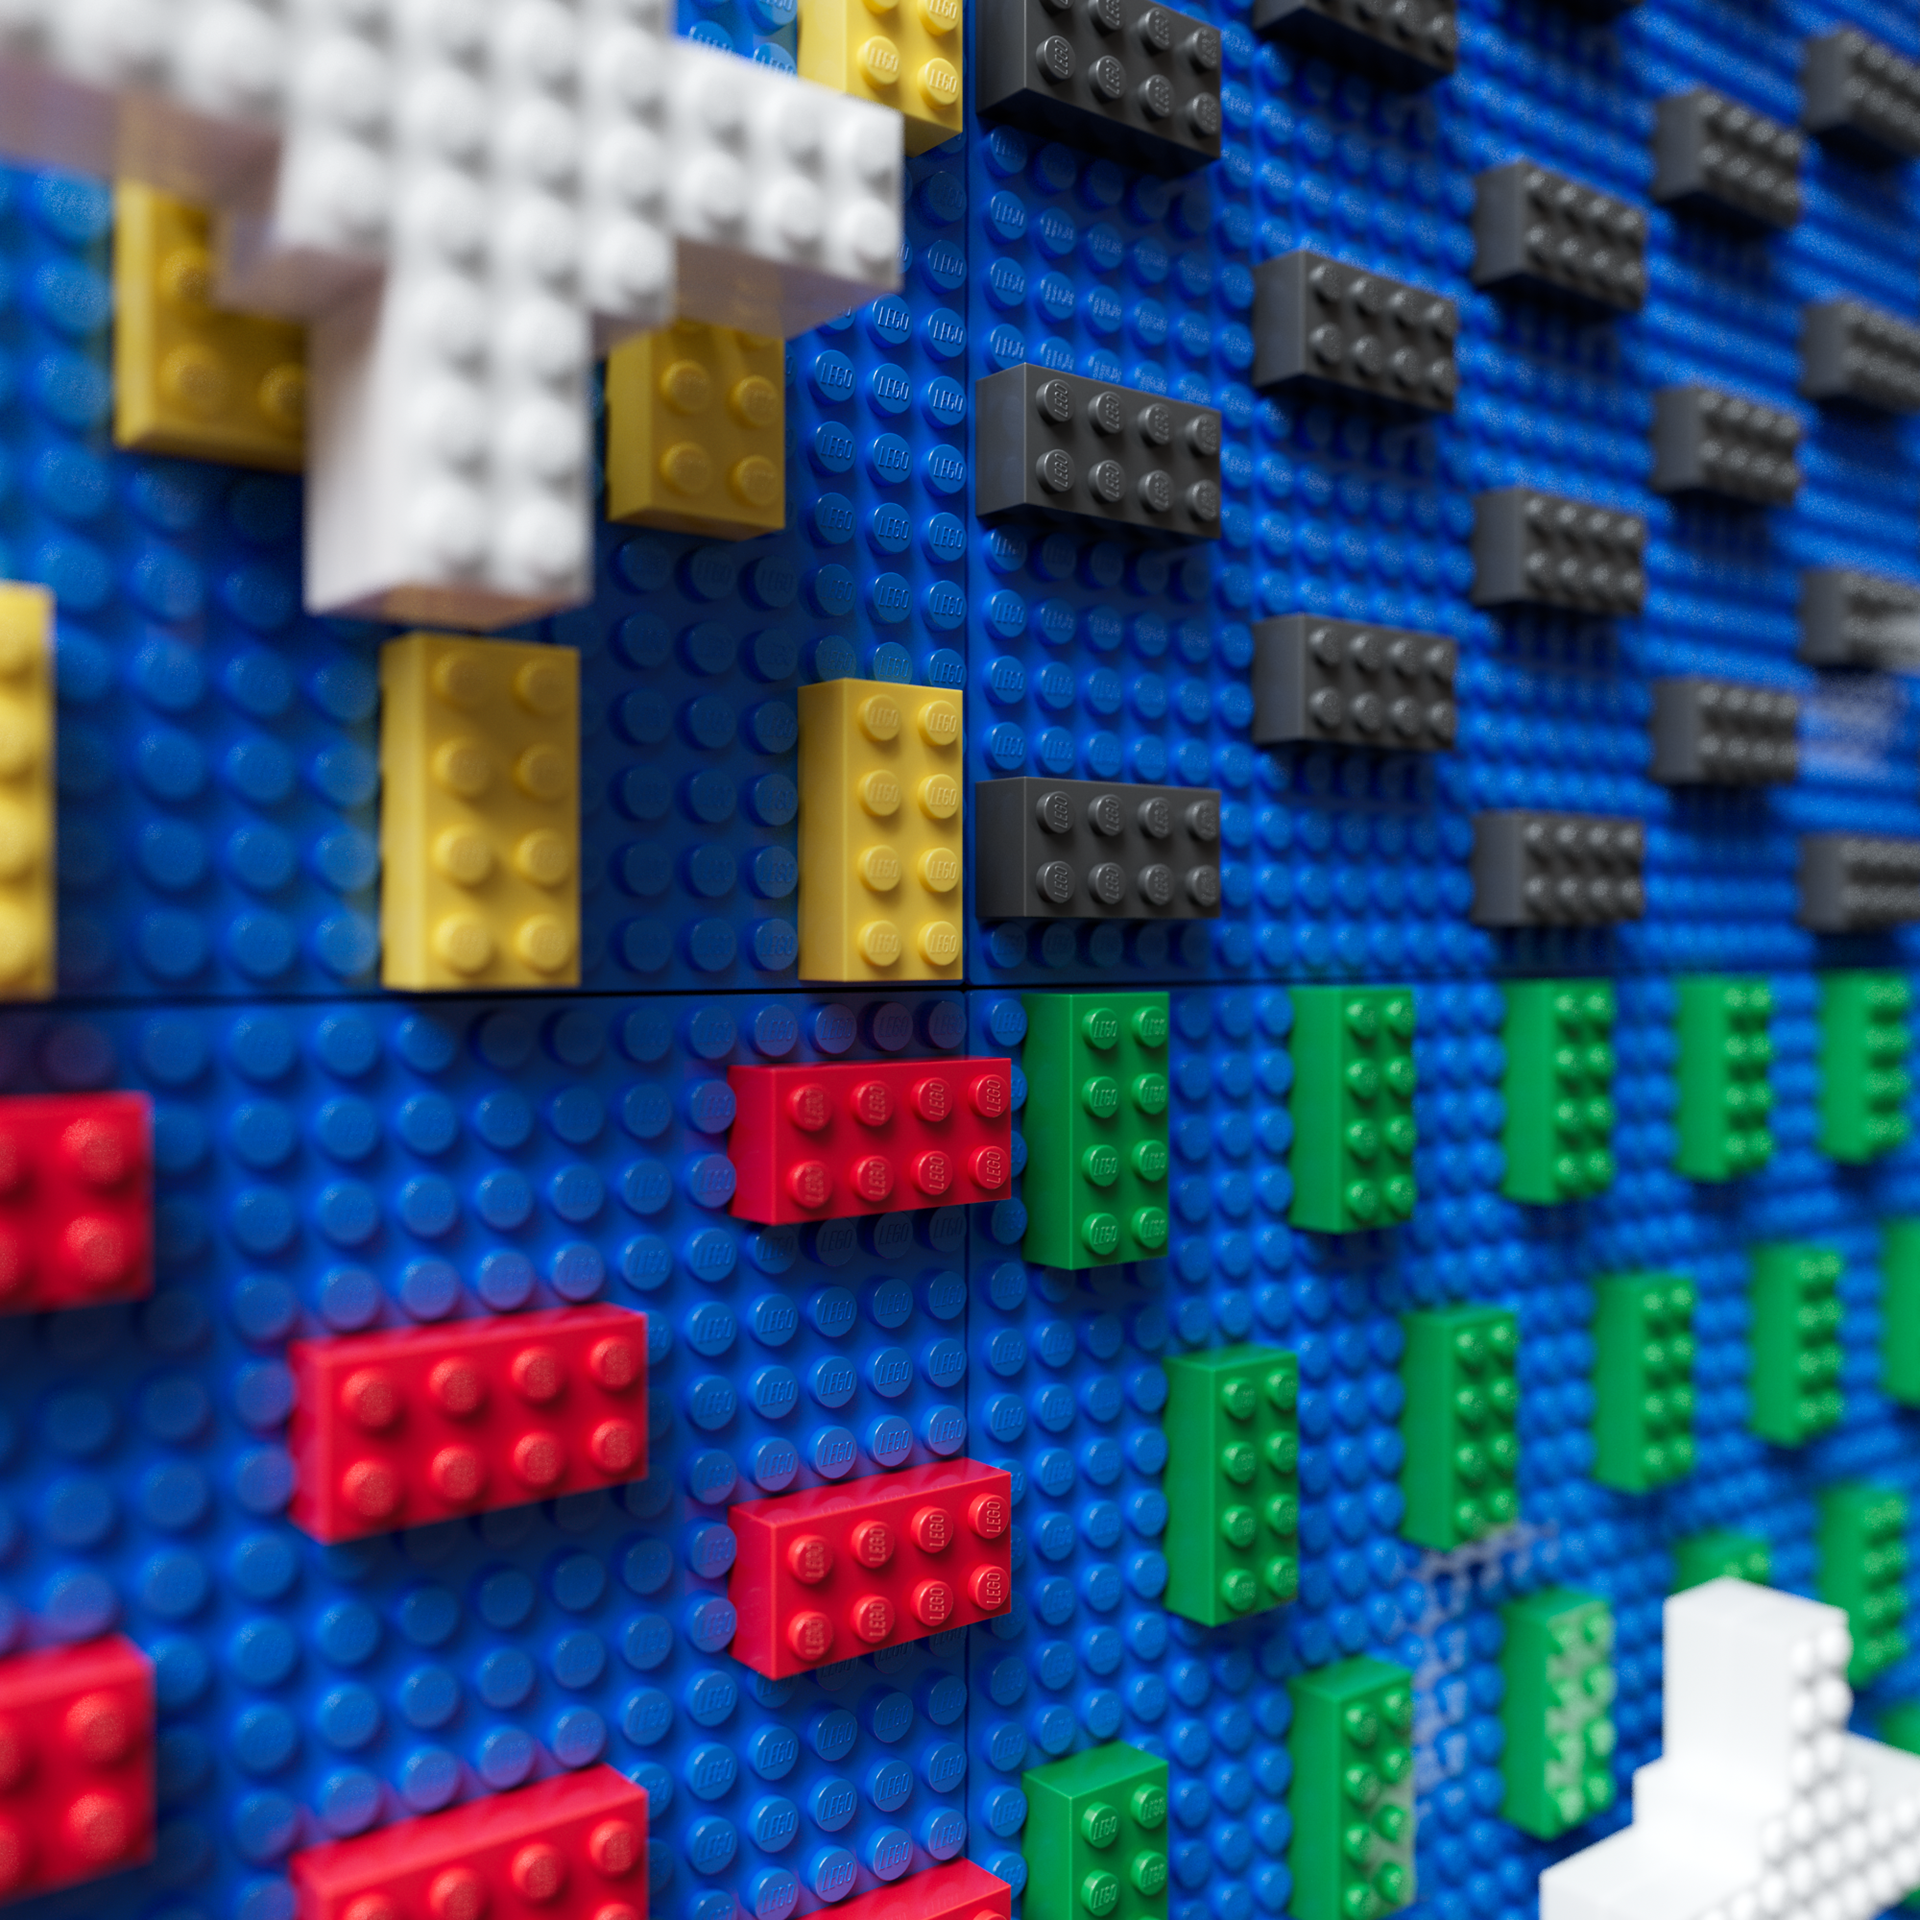 Louis Vuitton Collaborates With LEGO For Holiday Installations